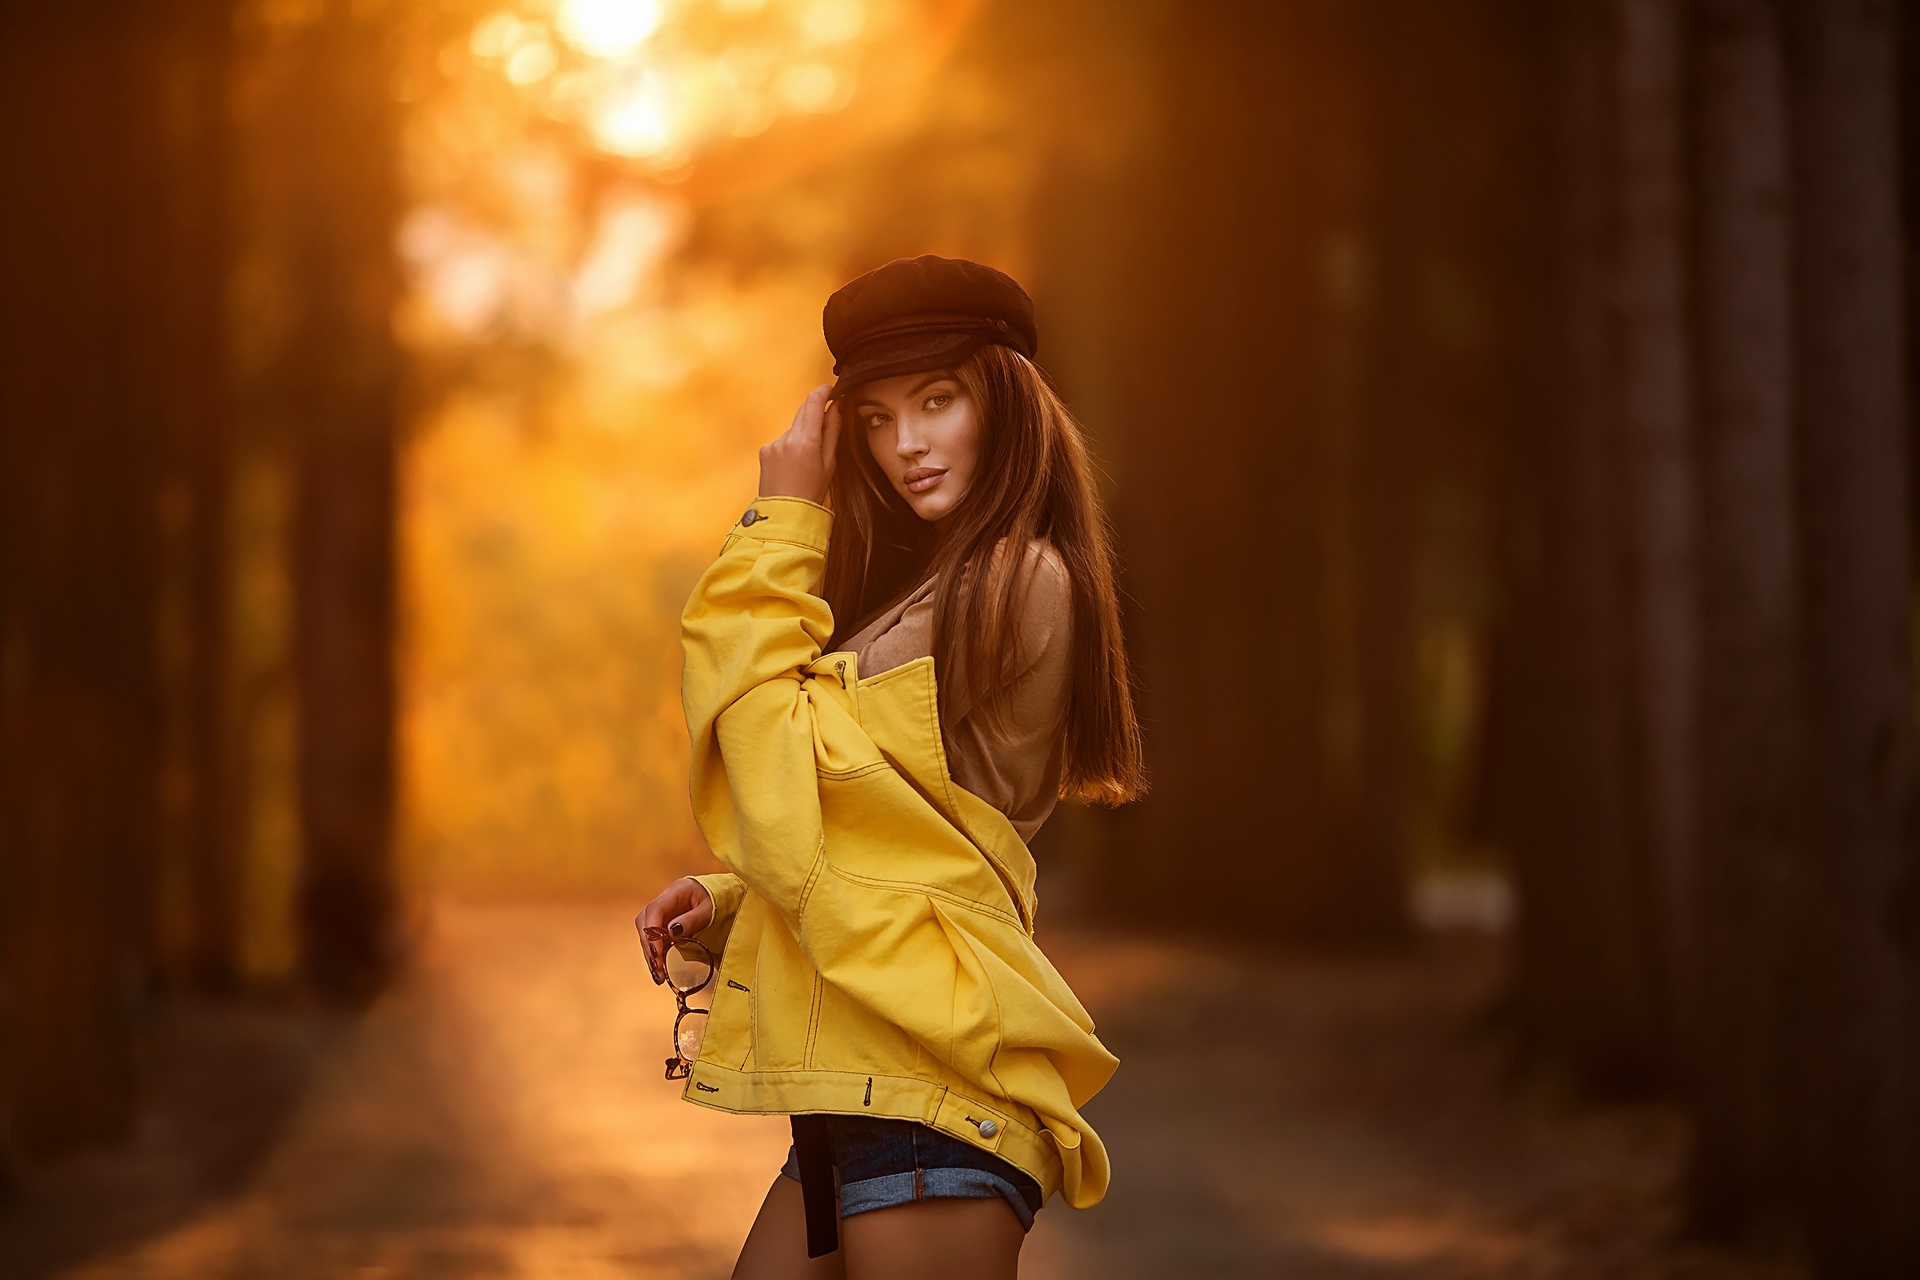 Anastasia Barmina Women Model Outdoors Brunette Looking At Viewer Glasses Berets Trees Sunset Depth  1920x1280